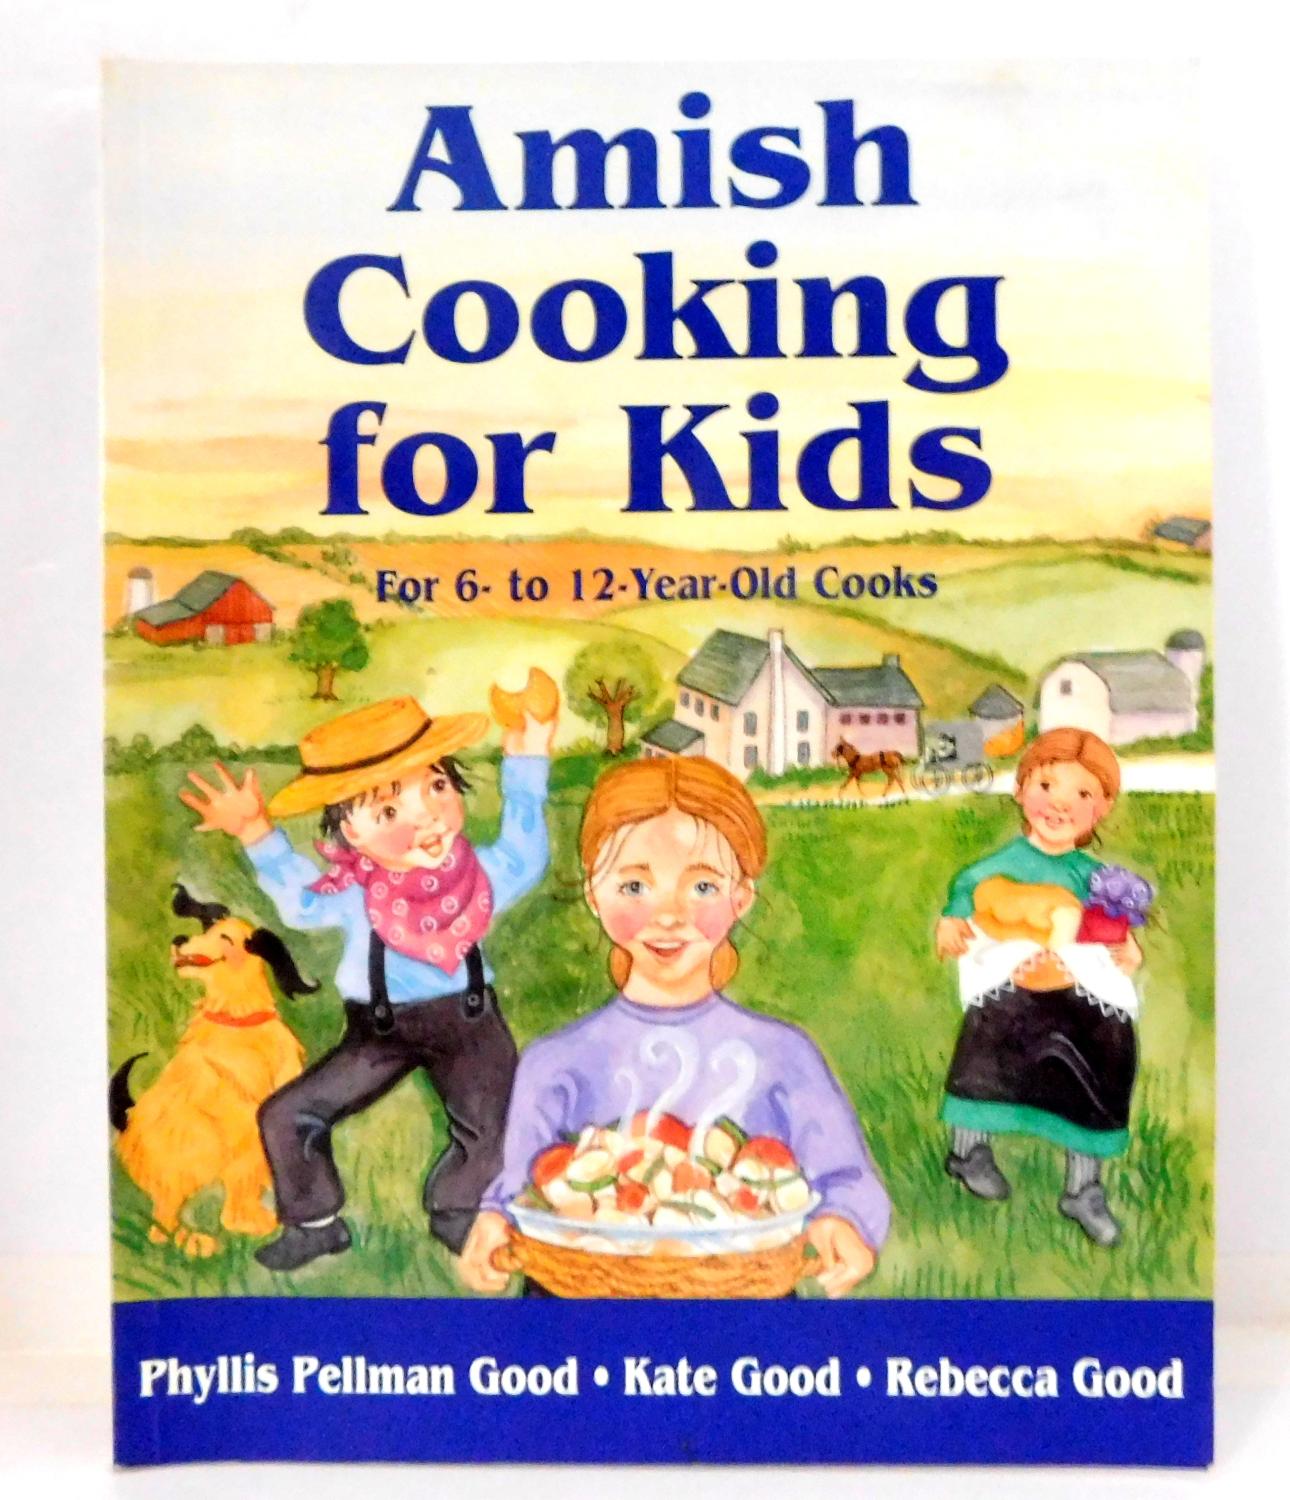 Amish Cooking for Kids: For 6 to 12 Year-Old Cooks - Good, Phyllis Pellman; Good, Kate; Good, Rebecca